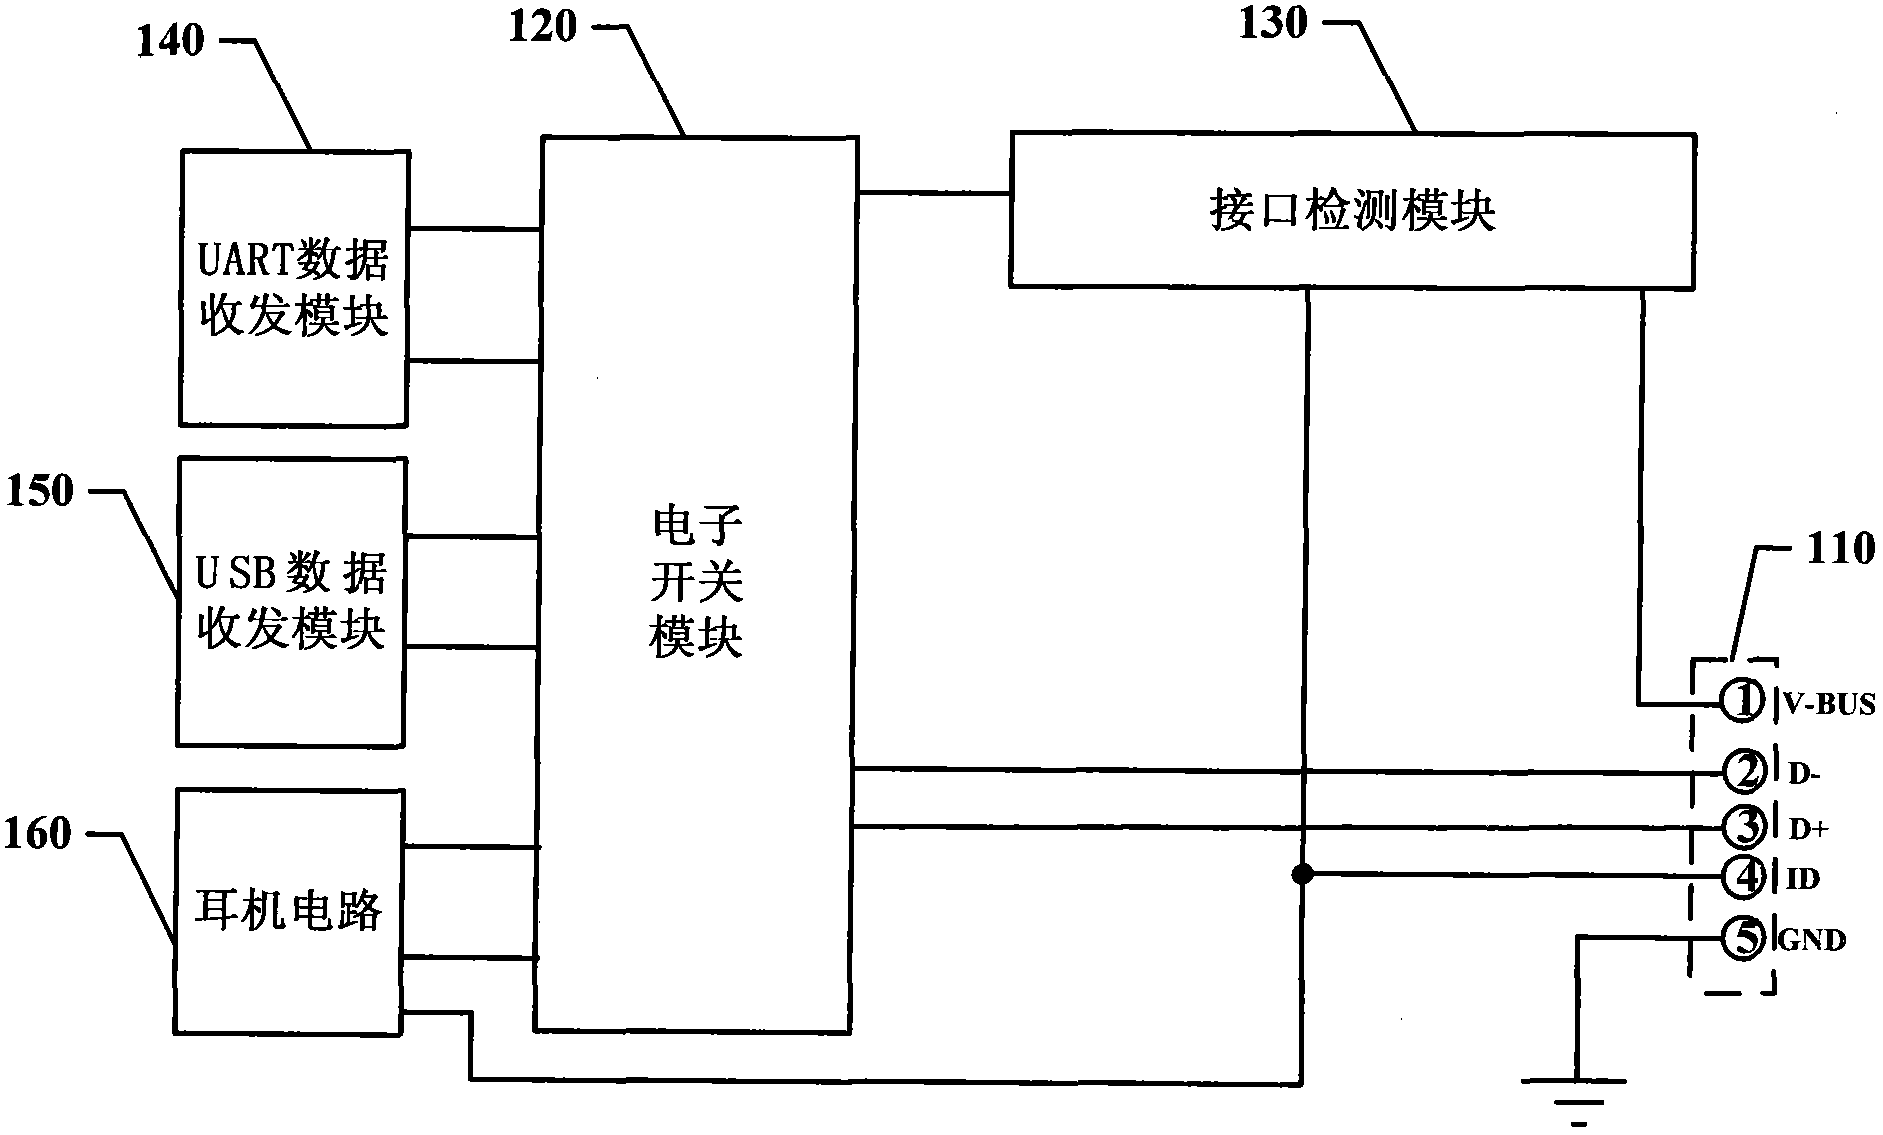 Method and device for sharing Micro-USB interface